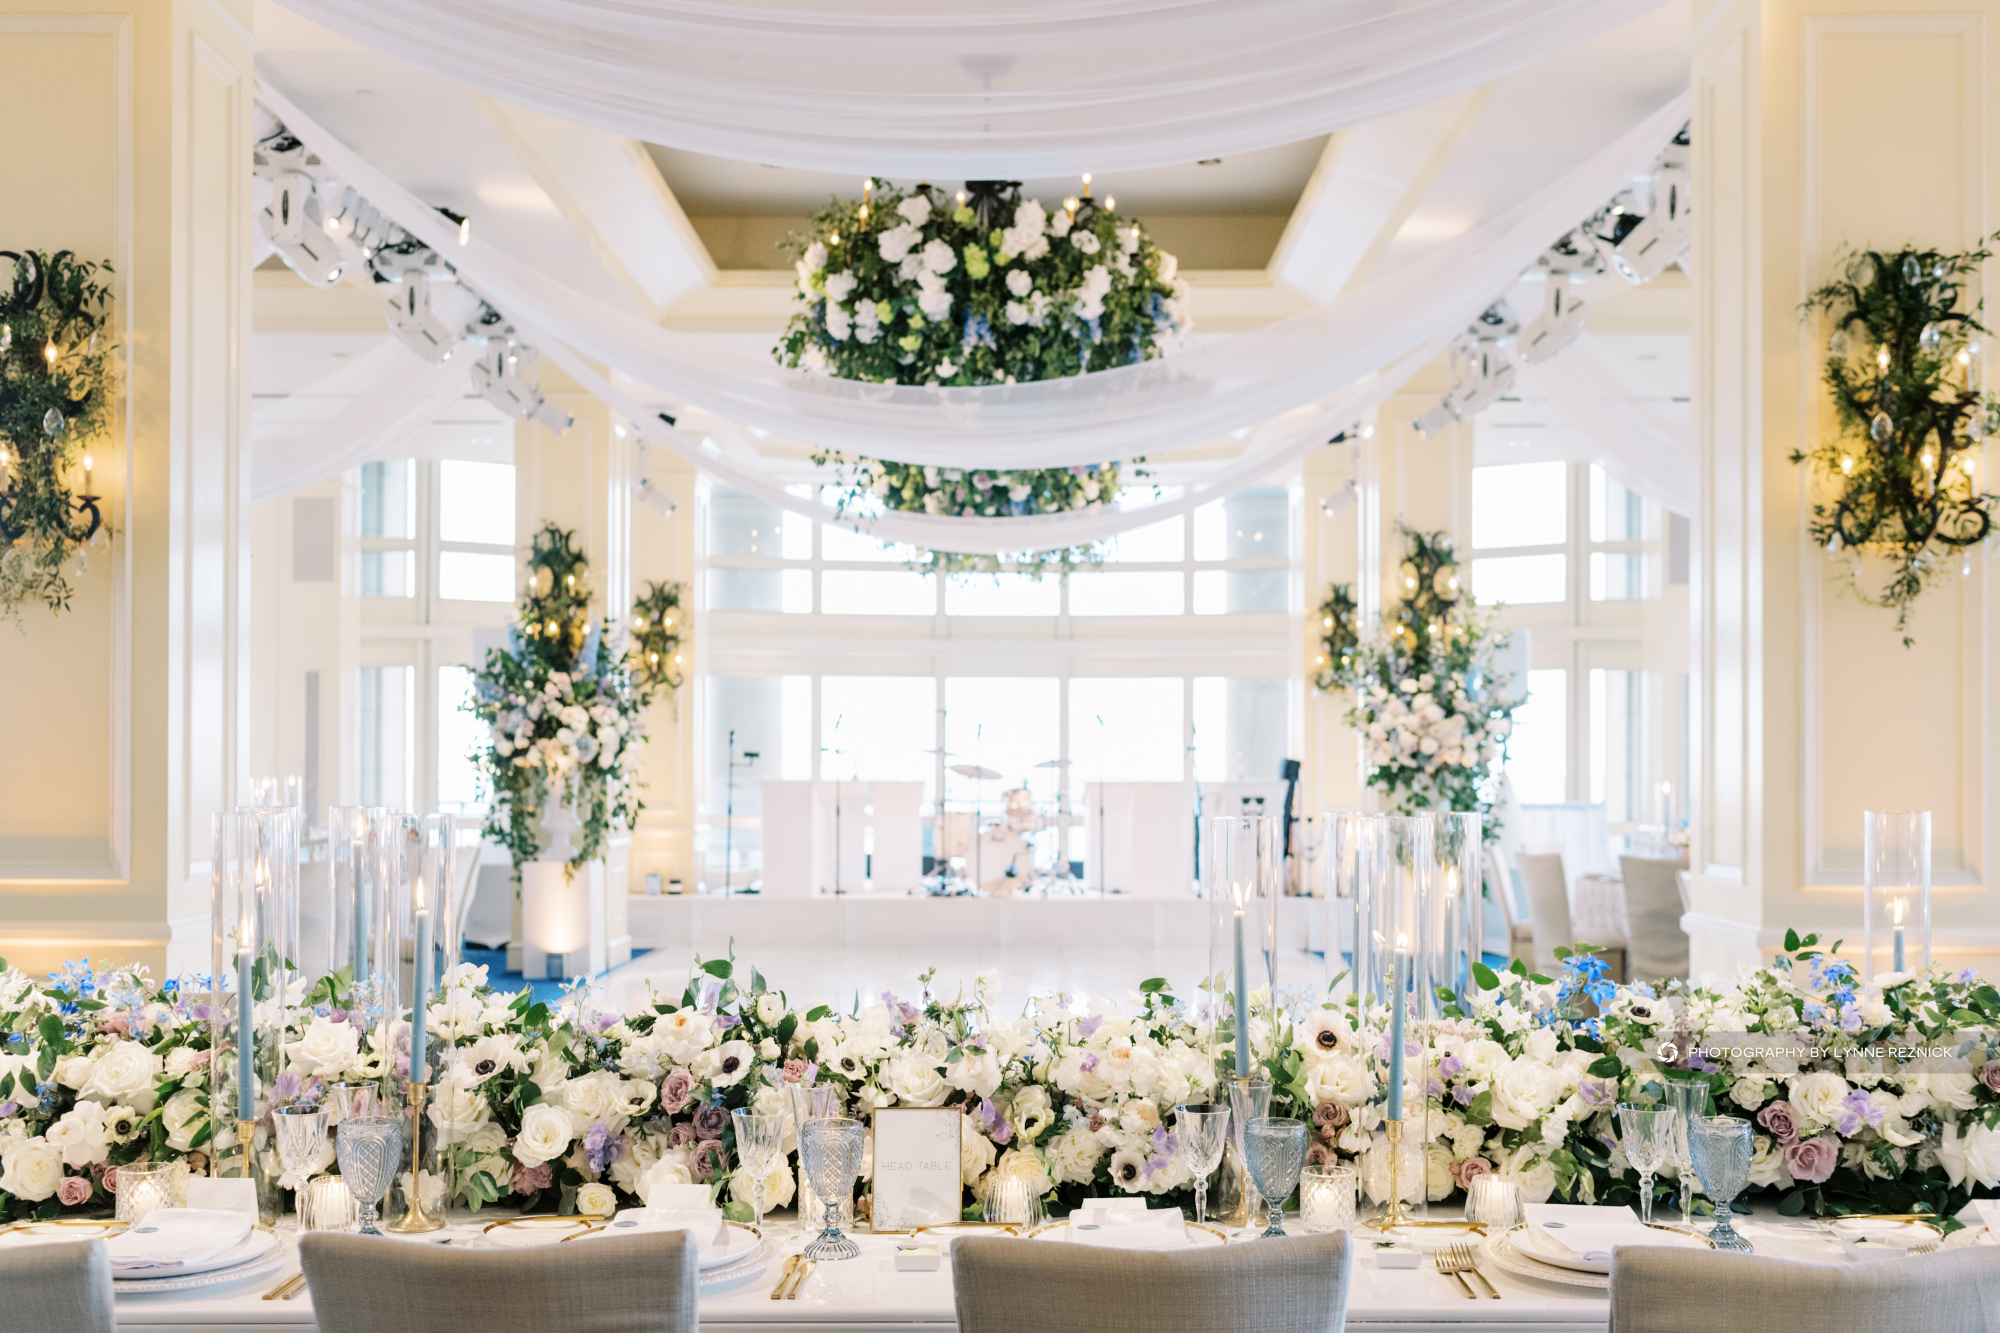 Elegant banquet hall set for an event with floral arrangements and soft lighting.